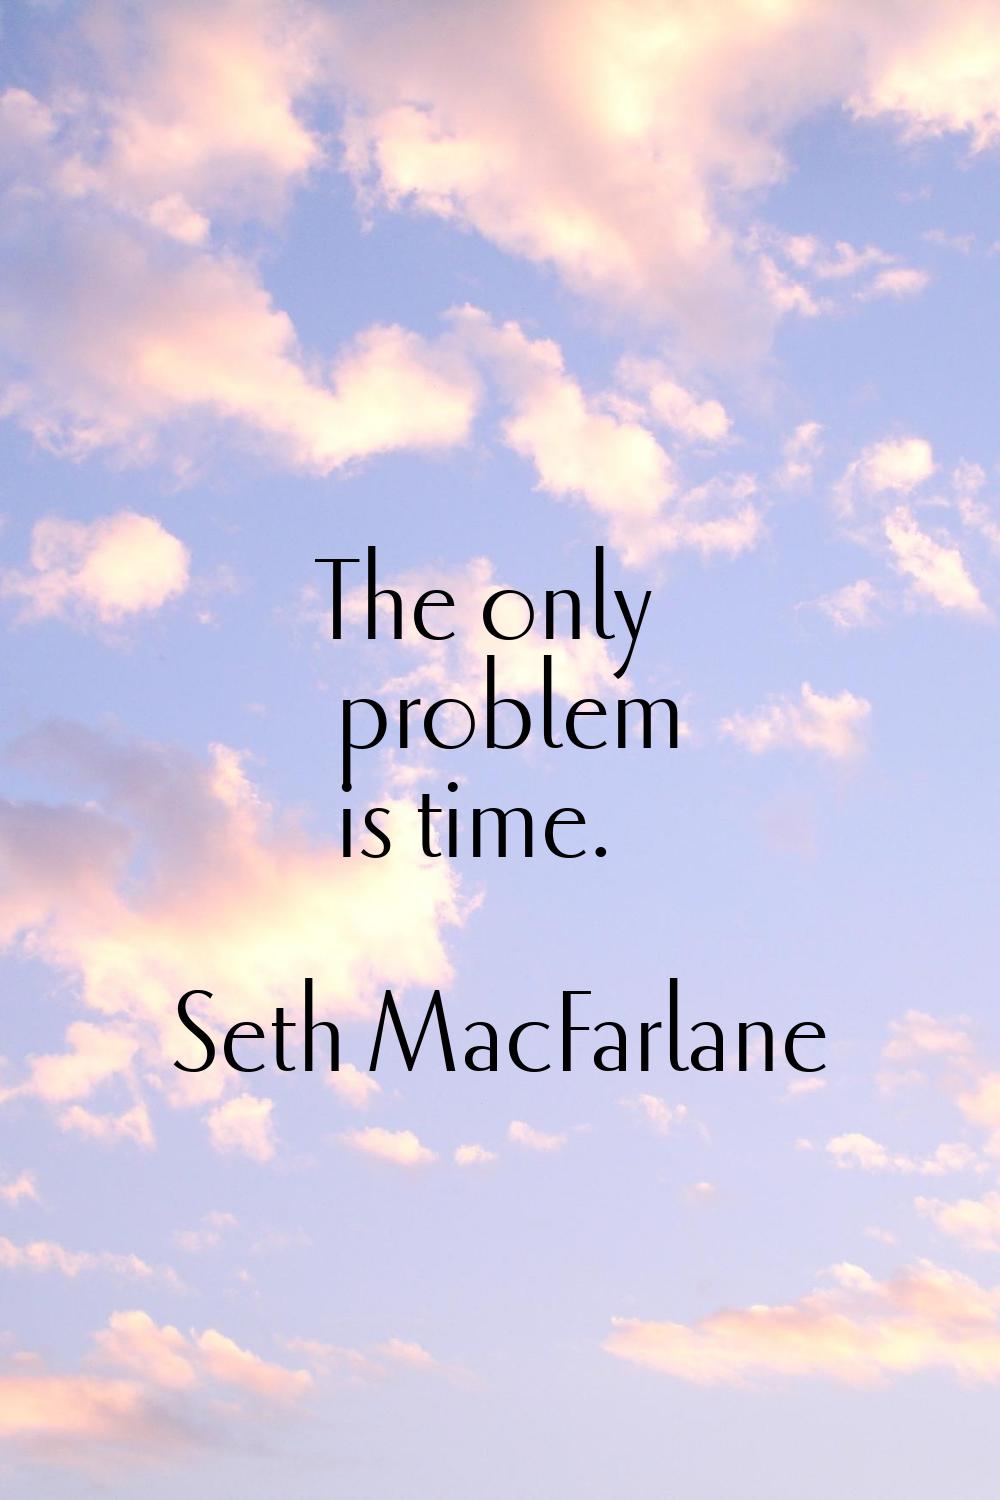 The only problem is time.